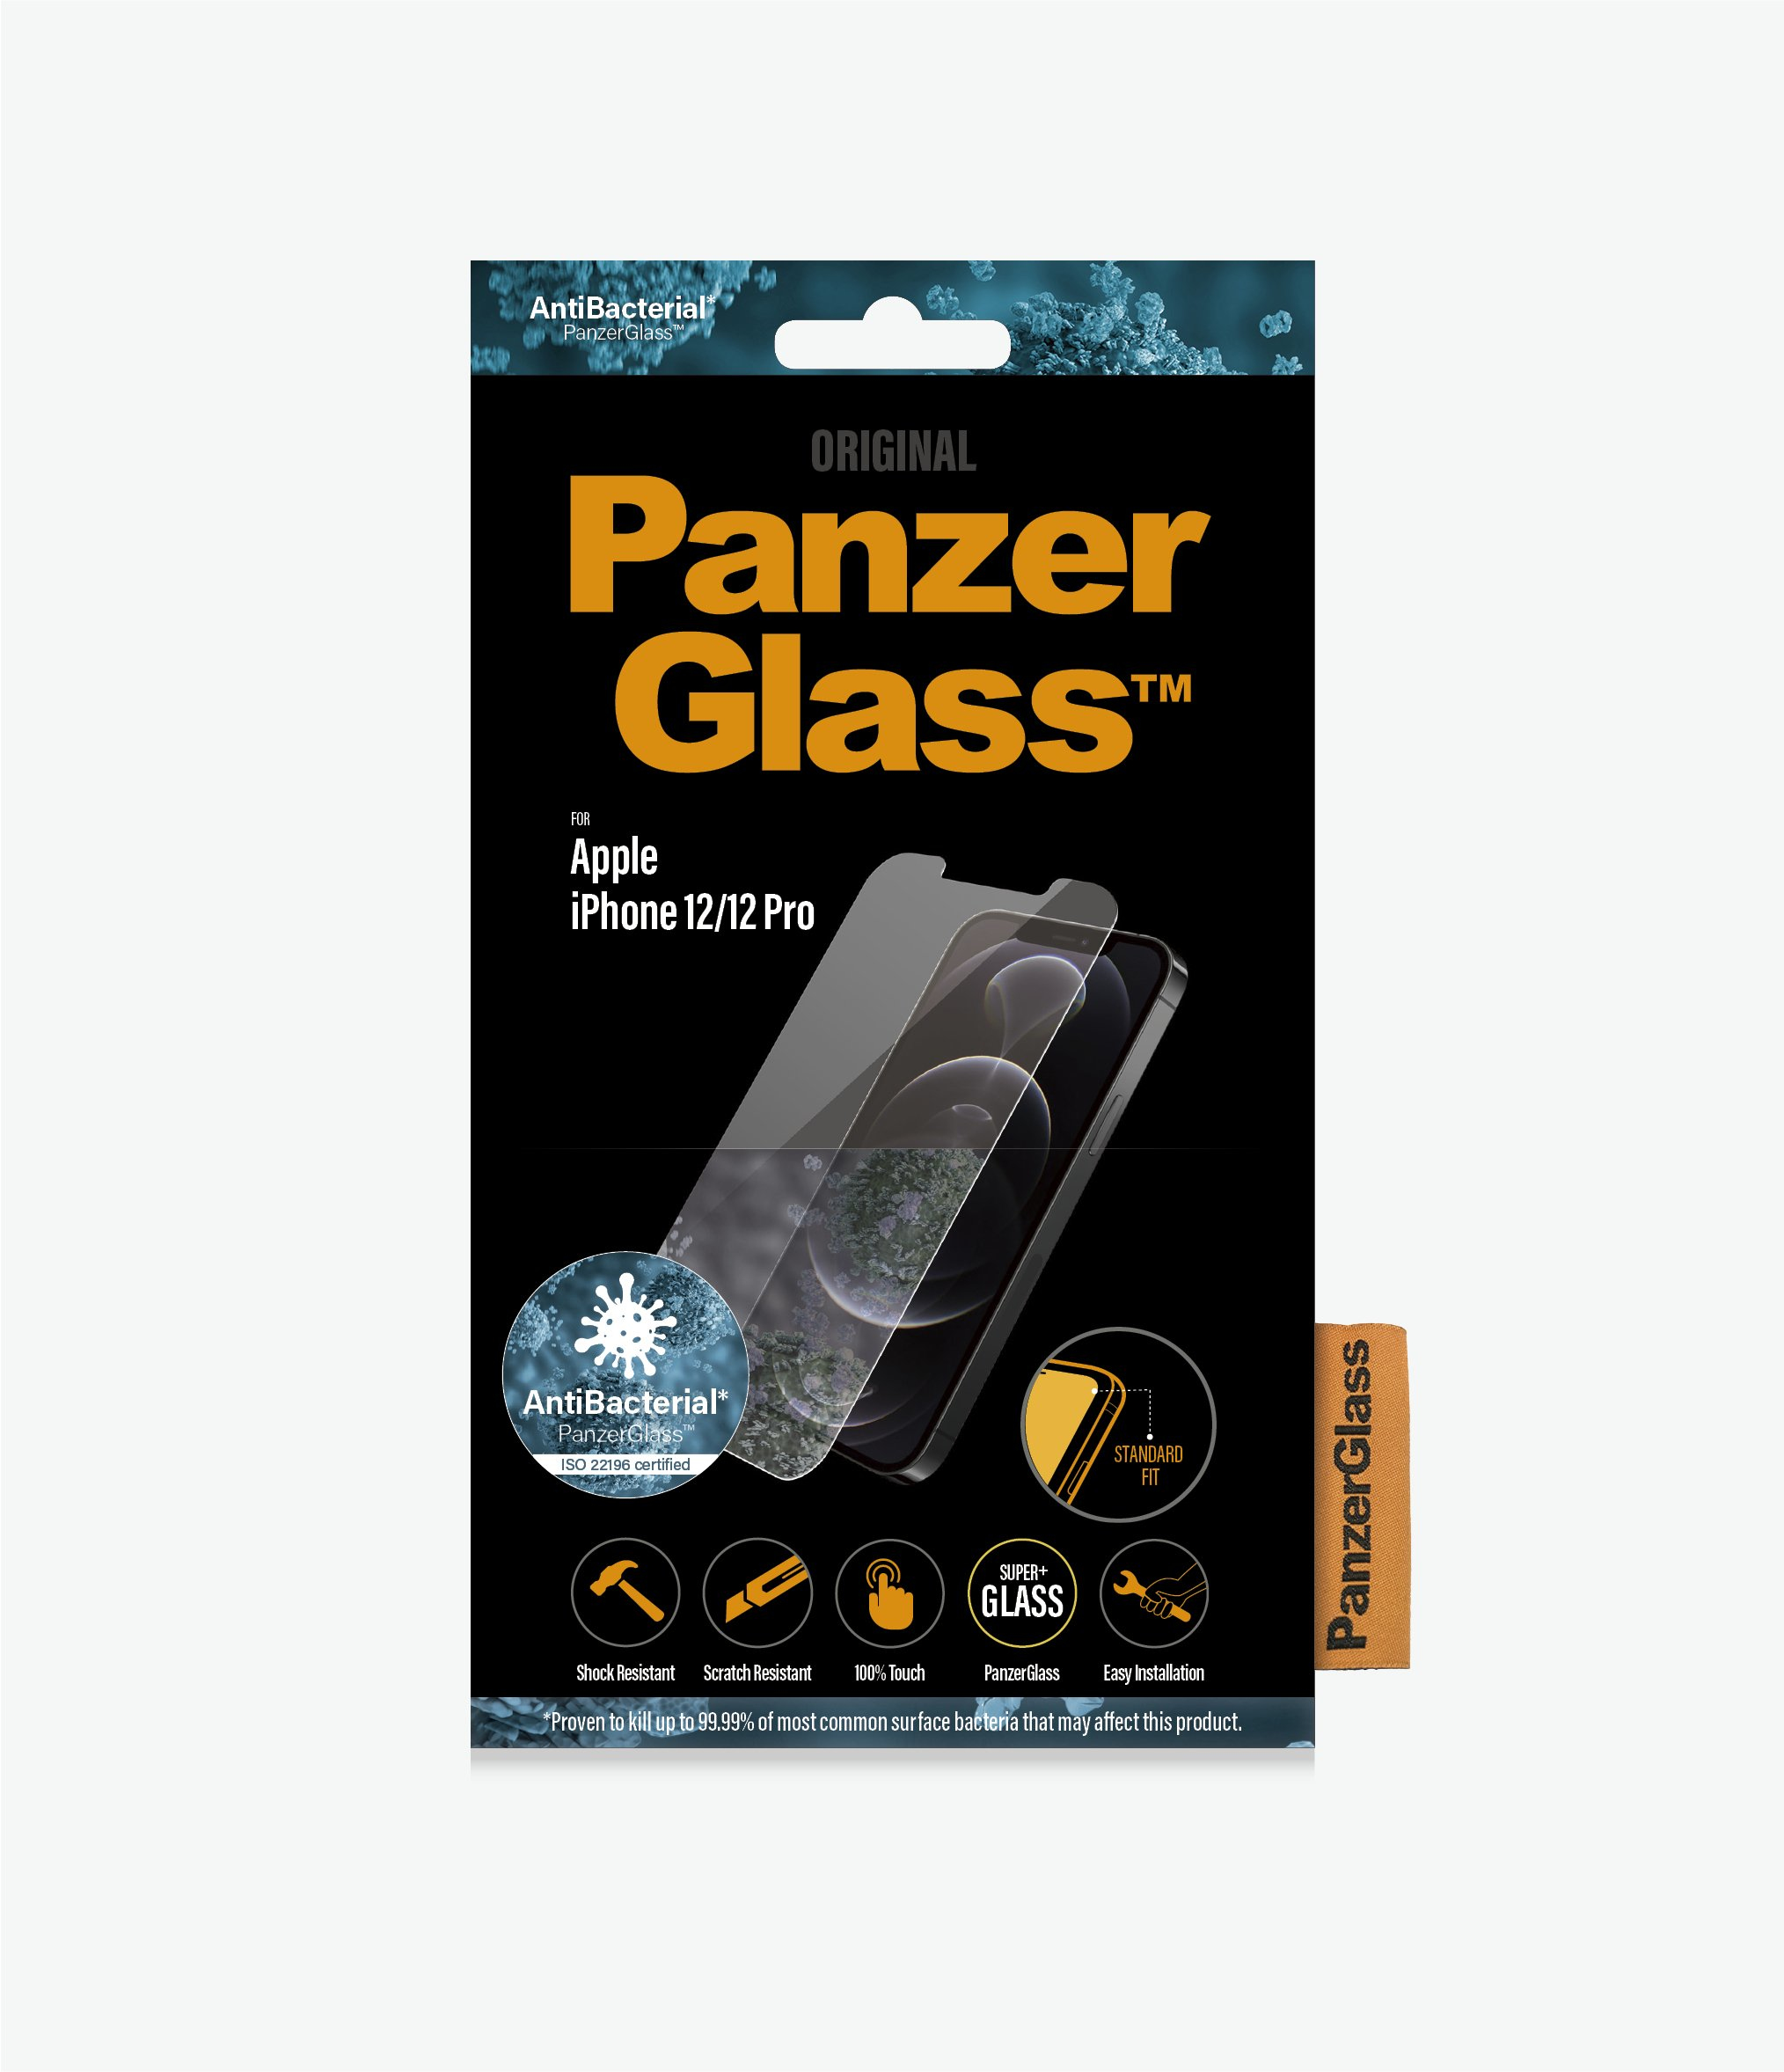 Panzer Glass Standard Fit for iPhone 12 Pro/12